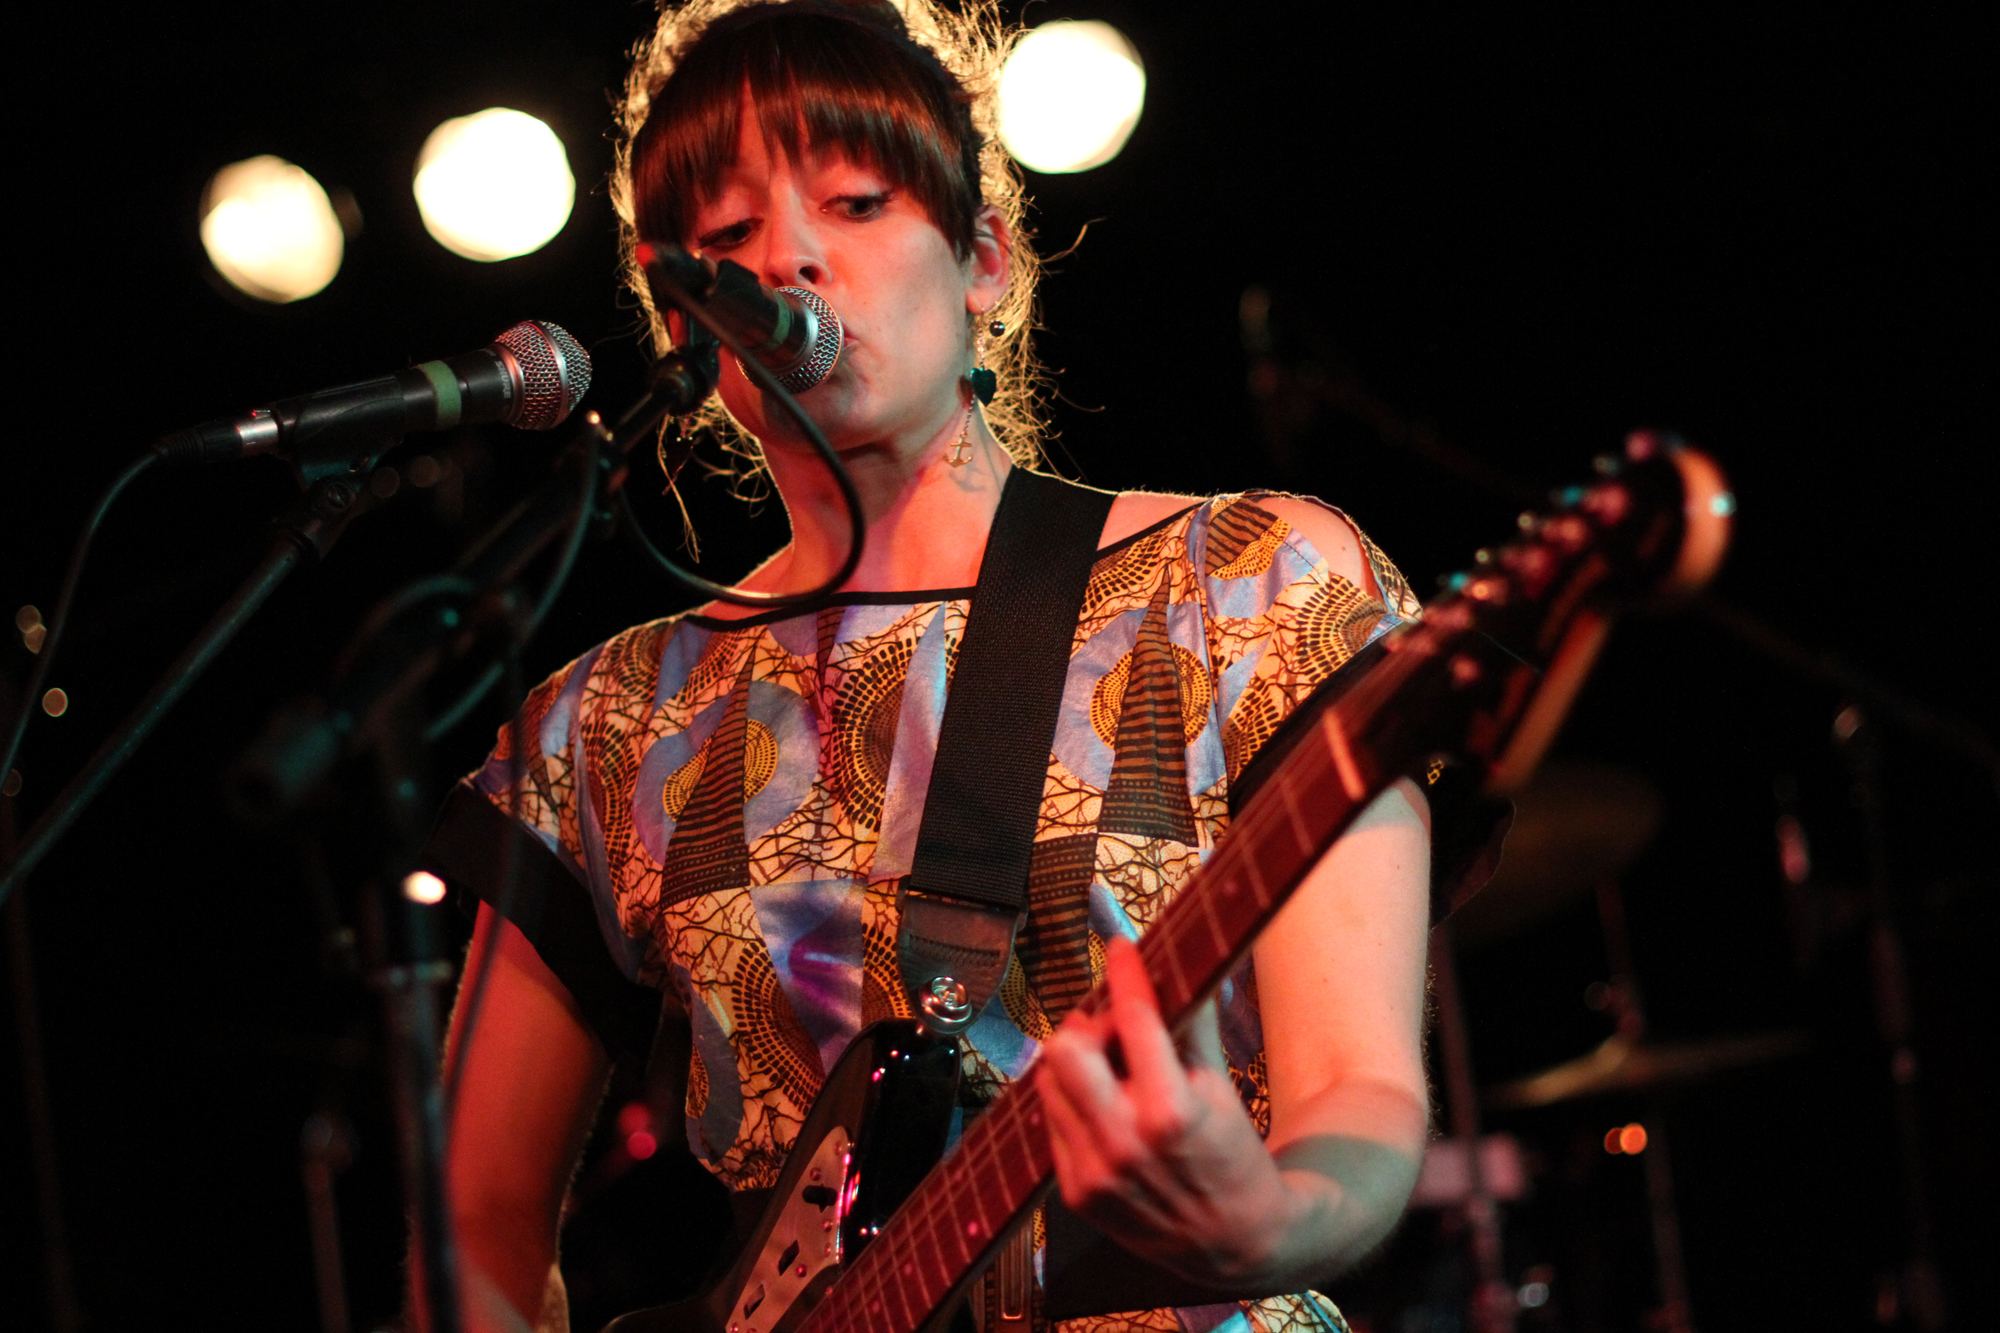 Little Scream performs at Black Cat in Washington, D.C. on May 17, 2011.